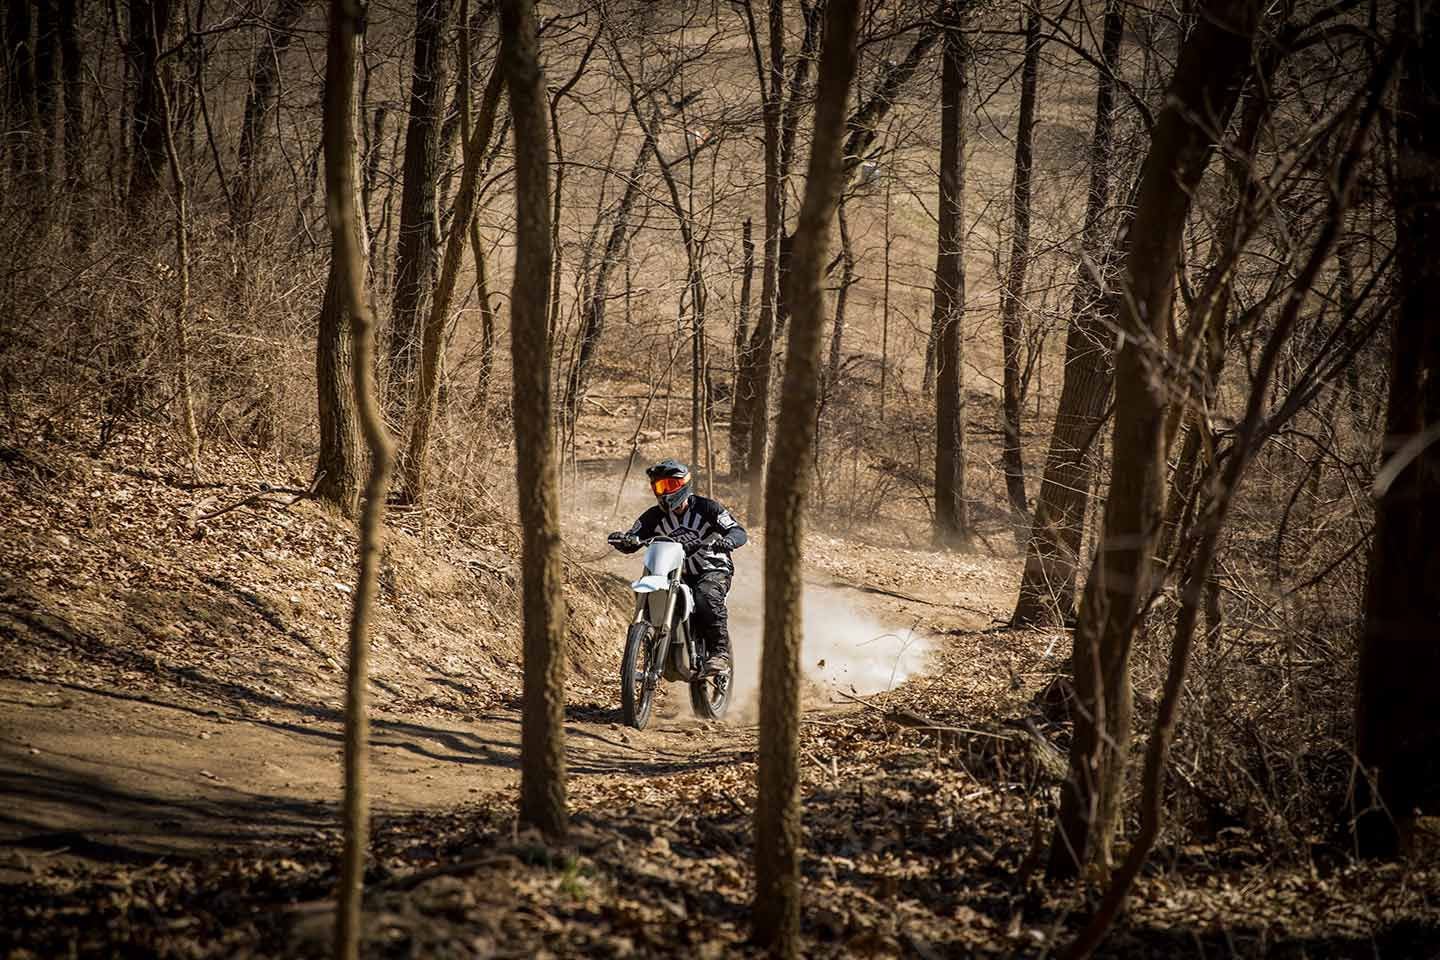 No shifting and near silent operation meant riders could fully focus on finding good lines through trails.